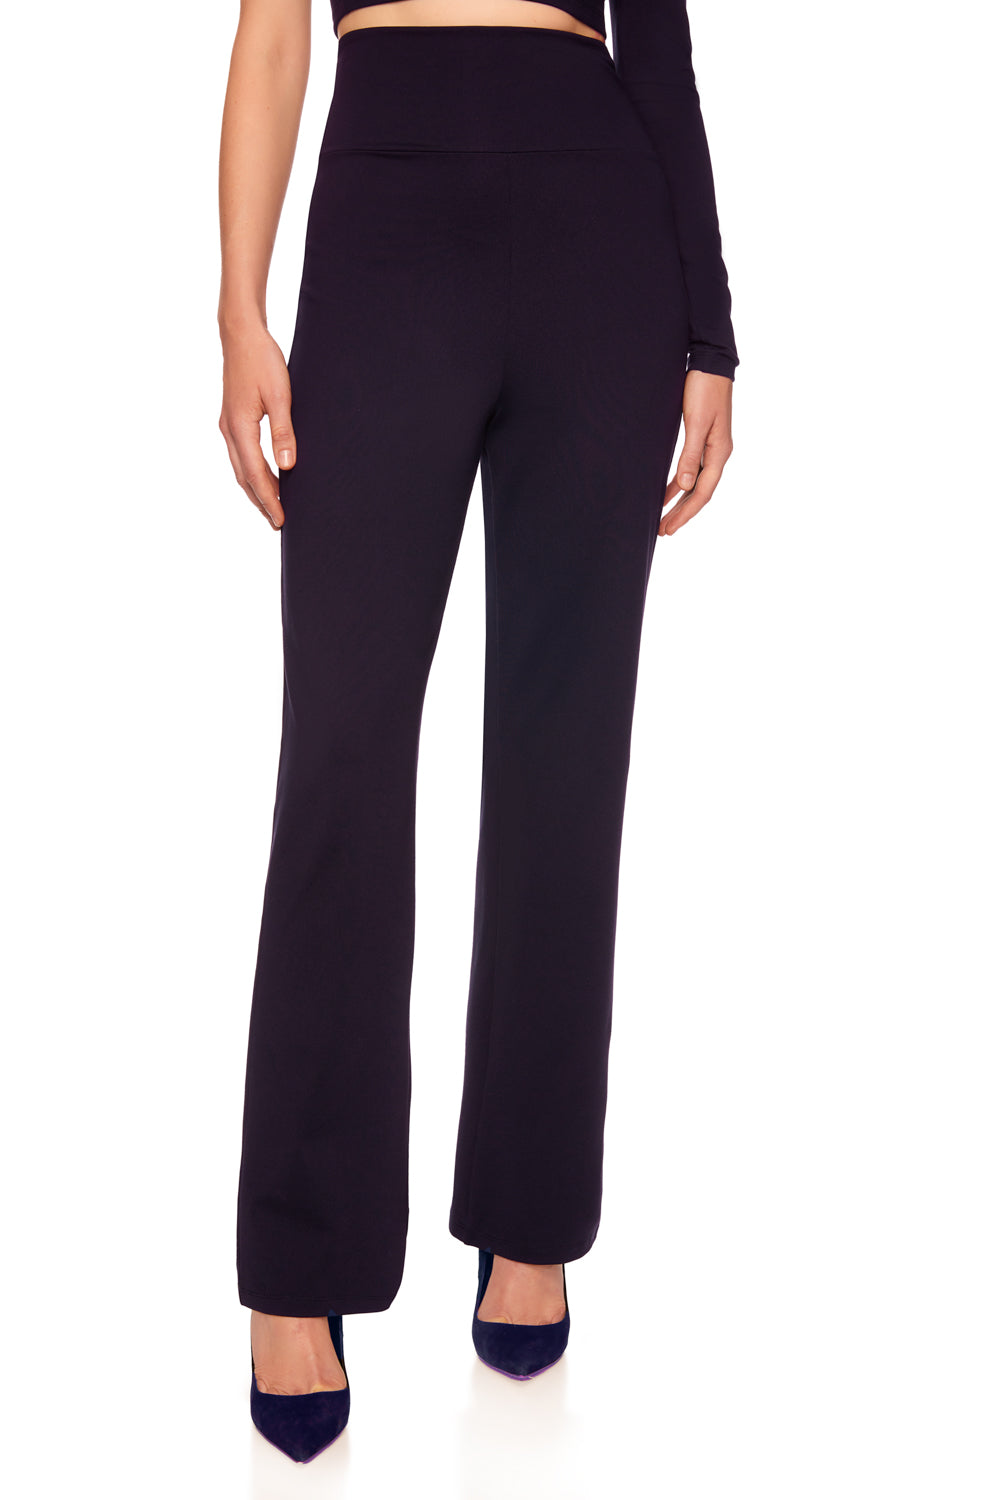 Susana Monaco High-waist Straight-leg Stretch Pants In Blanched Almond